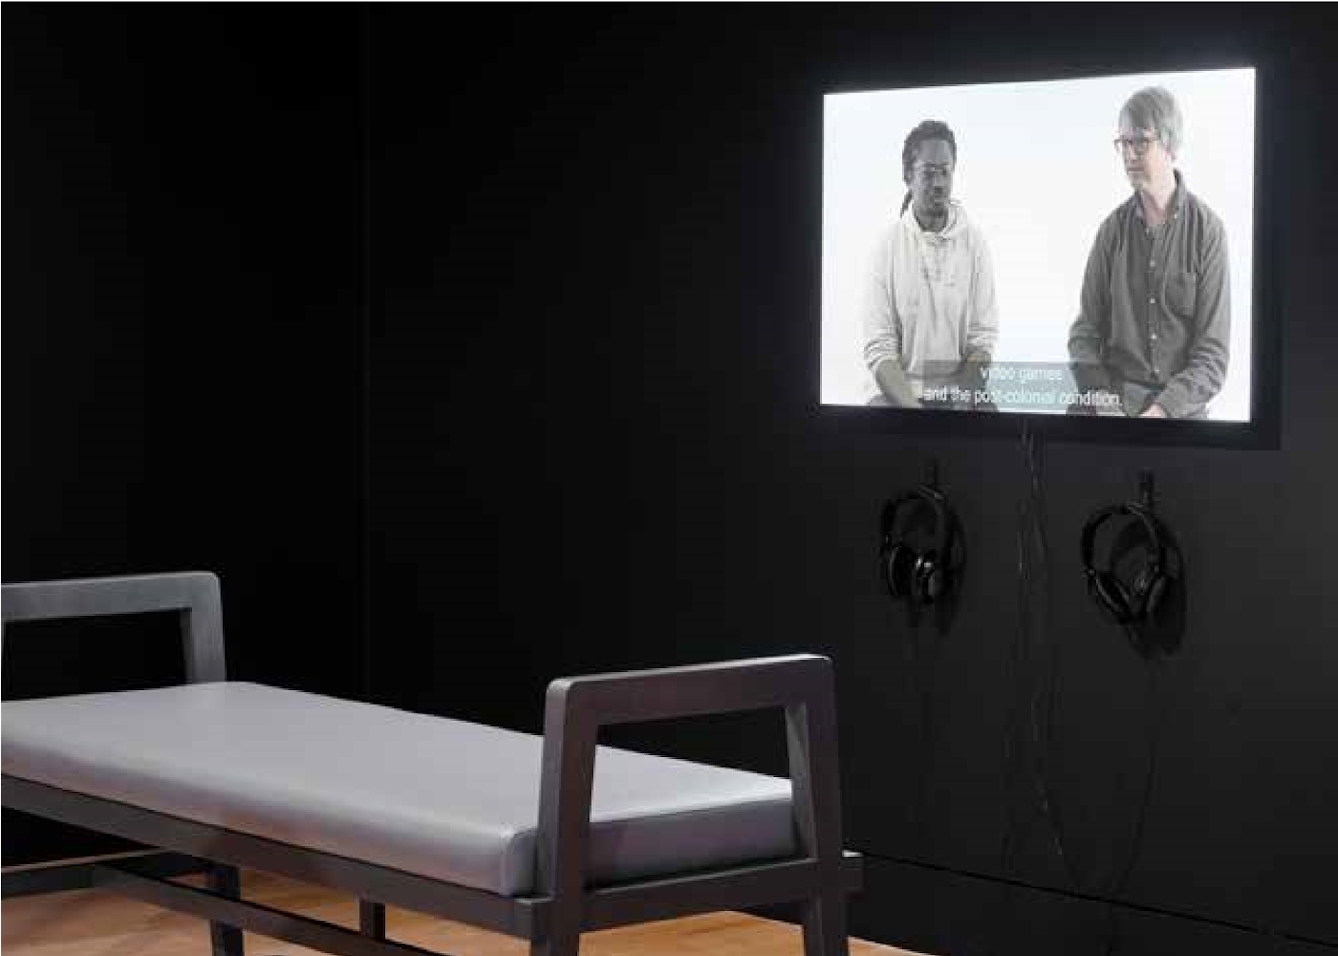 A video screen with two men sat side by side hangs on a black painted wall with two headphones hanging on the wall beneath the screen. A long bench is placed immediately infront of the screen.